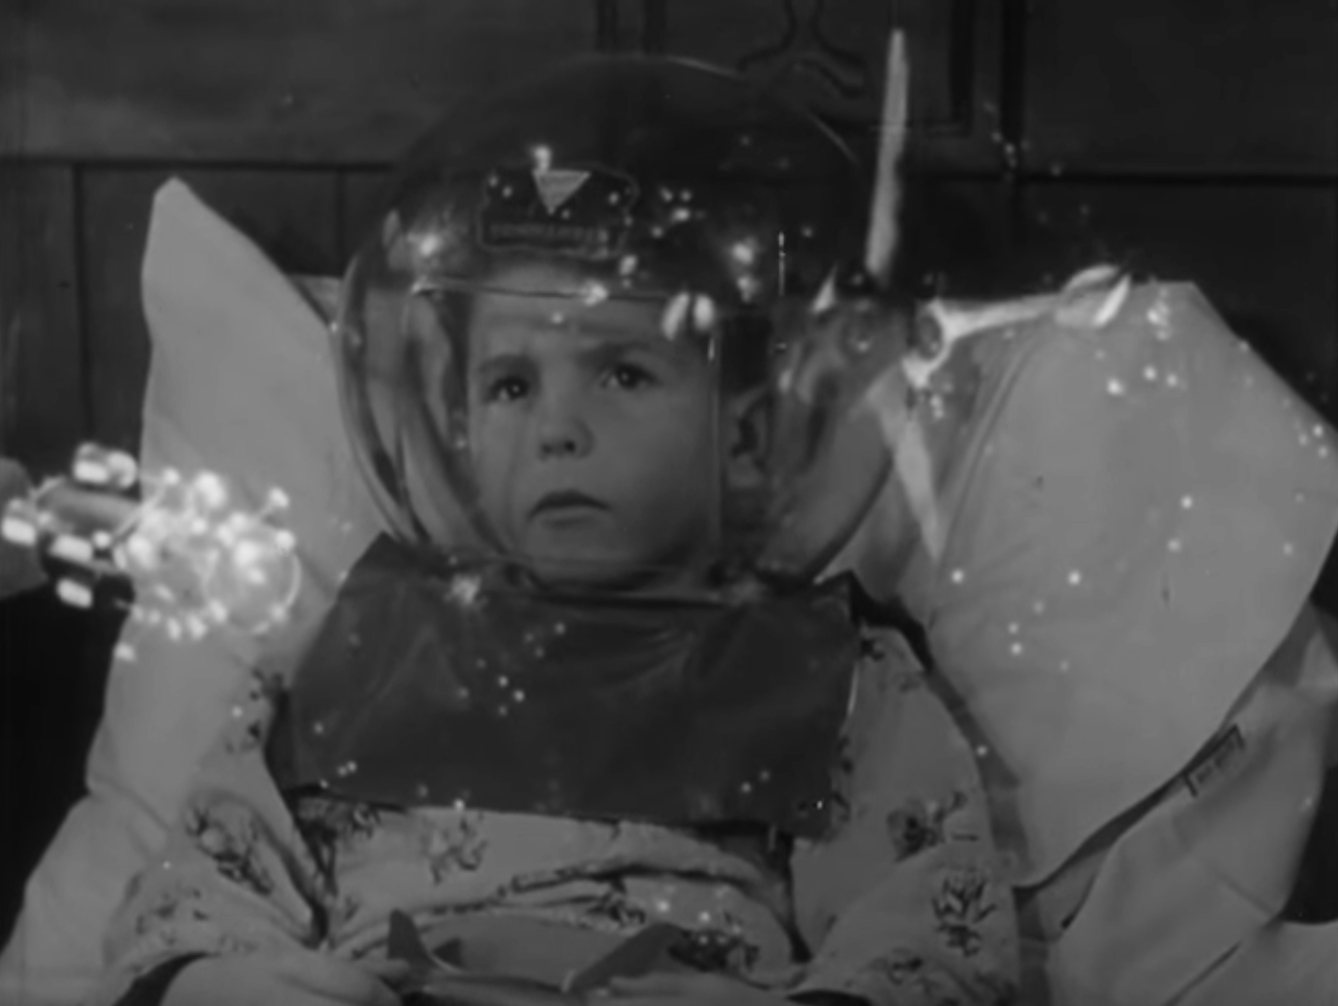 Still from black and white film featuring a boy in bed wearing a space helmet